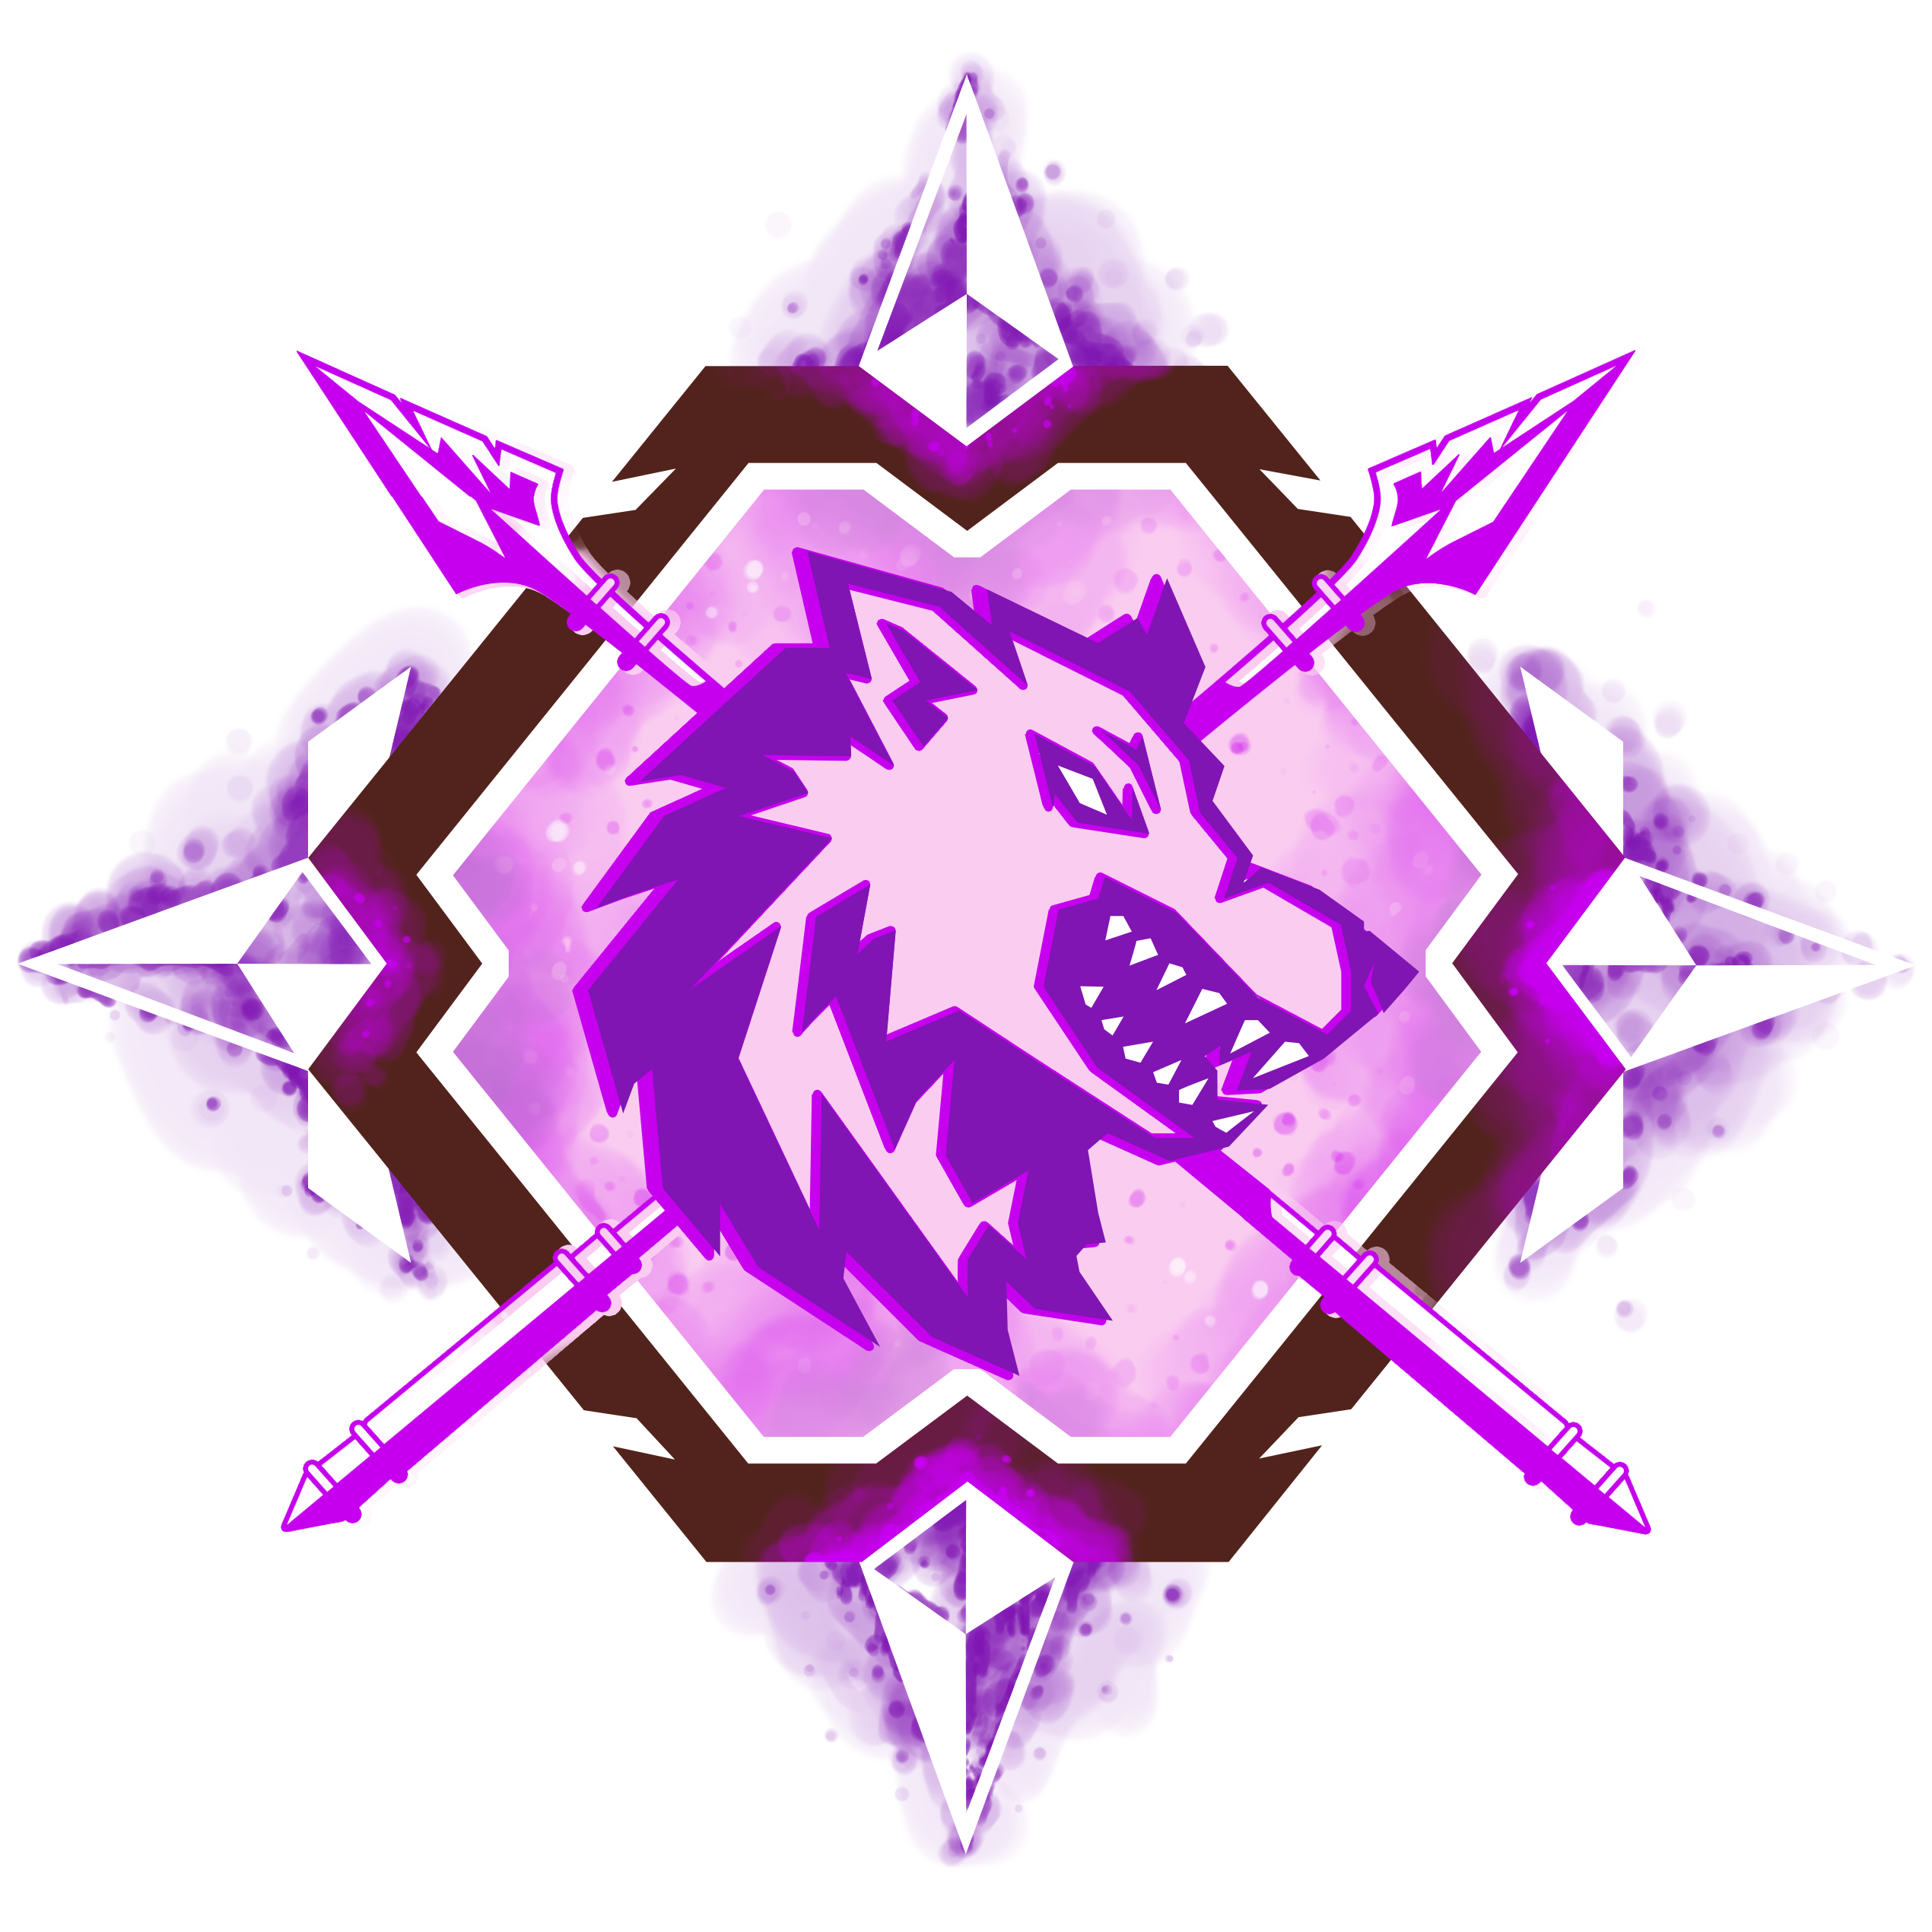 The logo of the Sentinels. A wolf head is visible in a somewhat hexagon-shaped object. The logo is purple and pink, and spears and spikes adorn the sides of the logo.